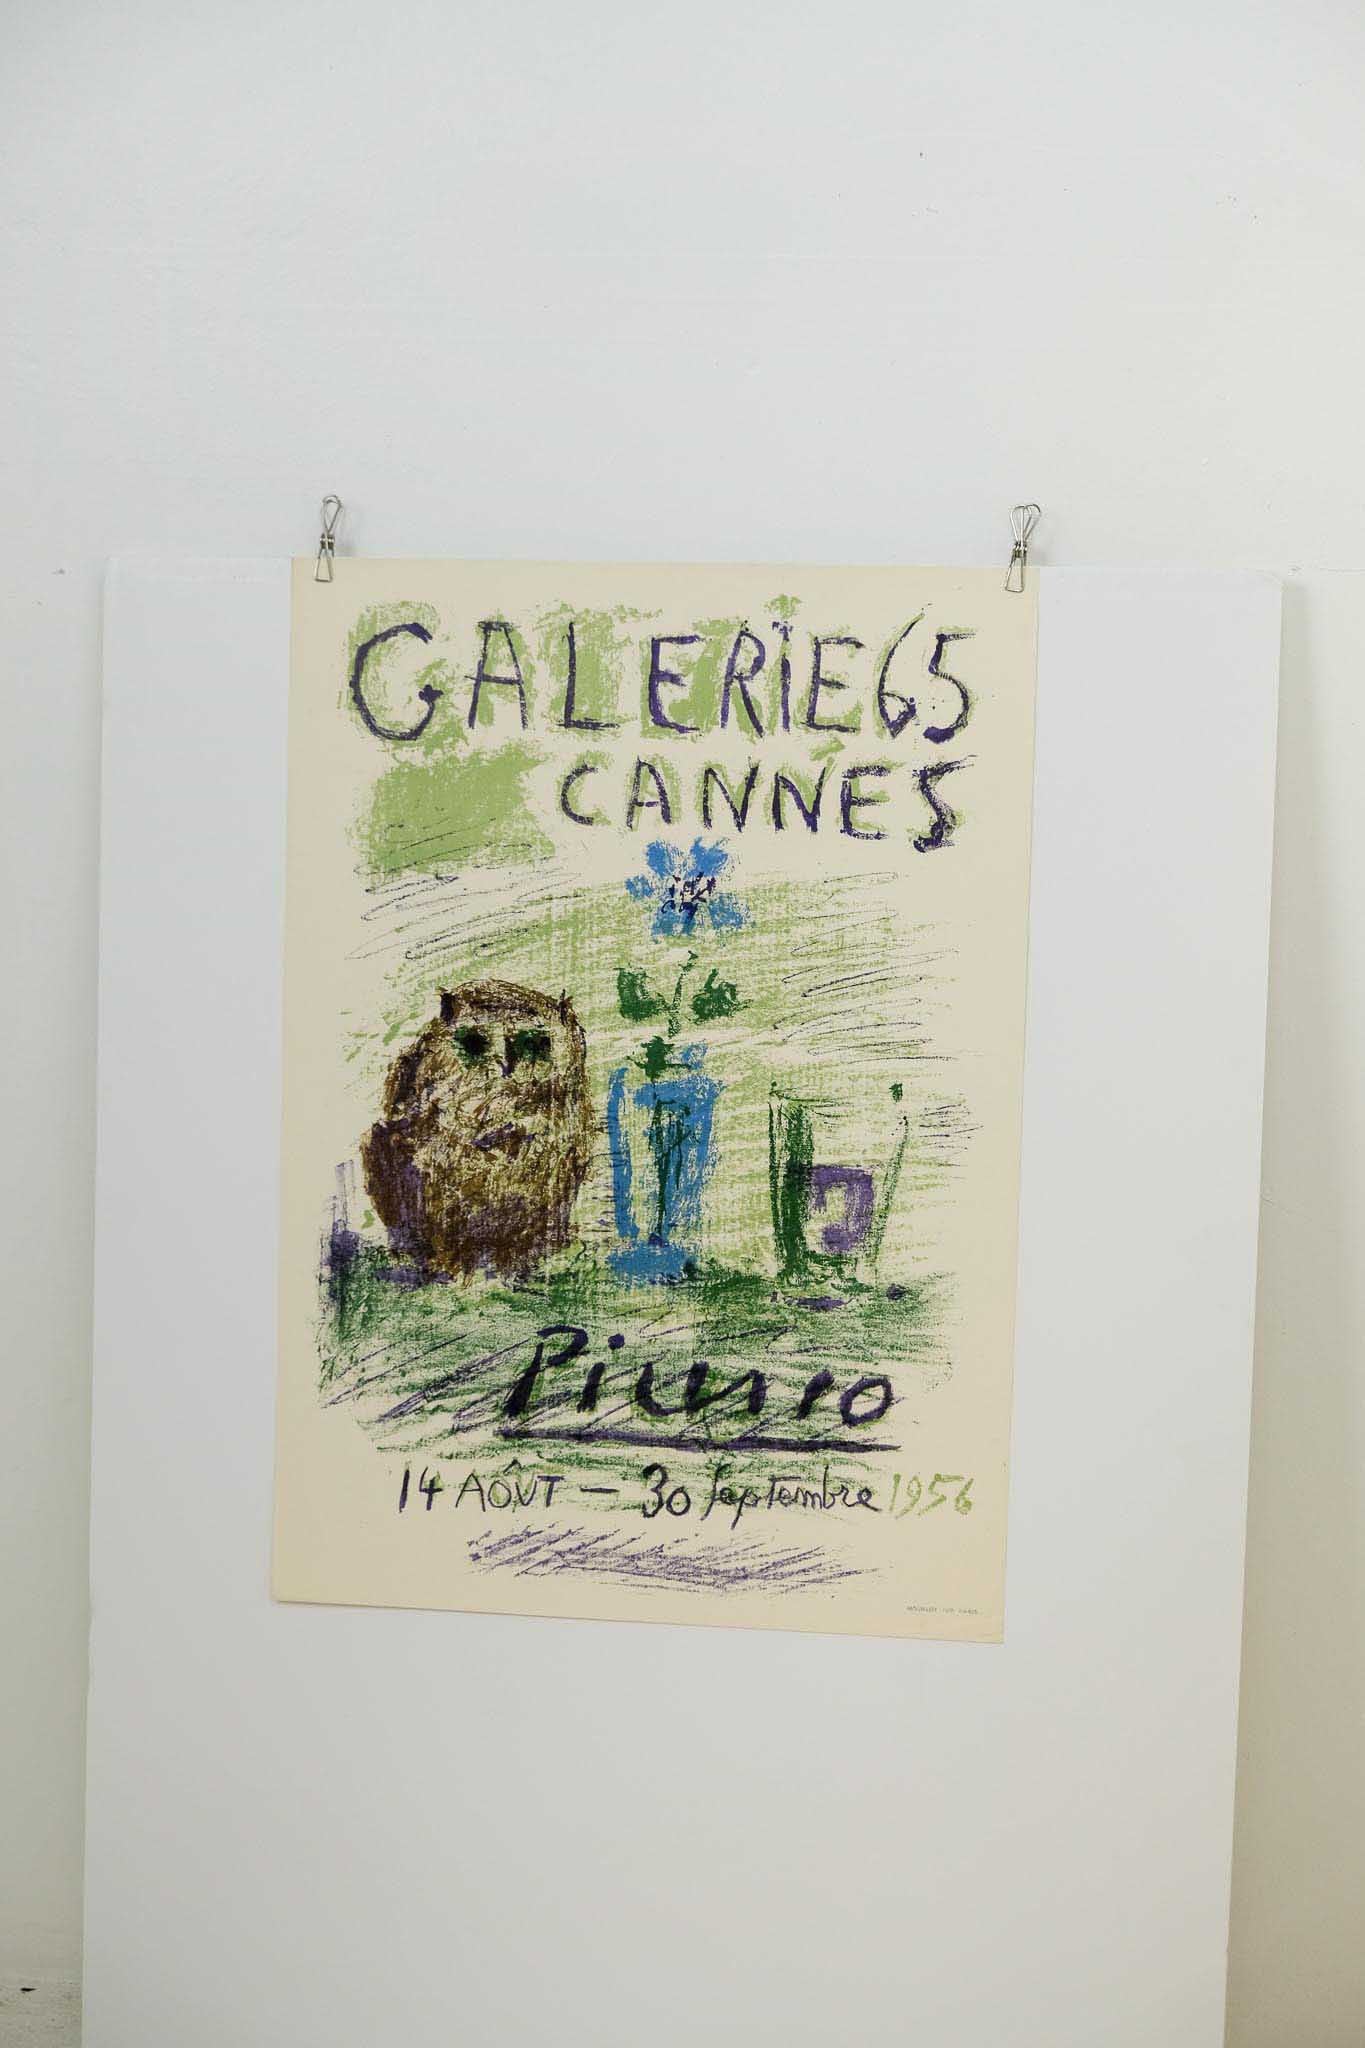 Pablo Picasso Galerie 65 Cannes Lithograph 1956